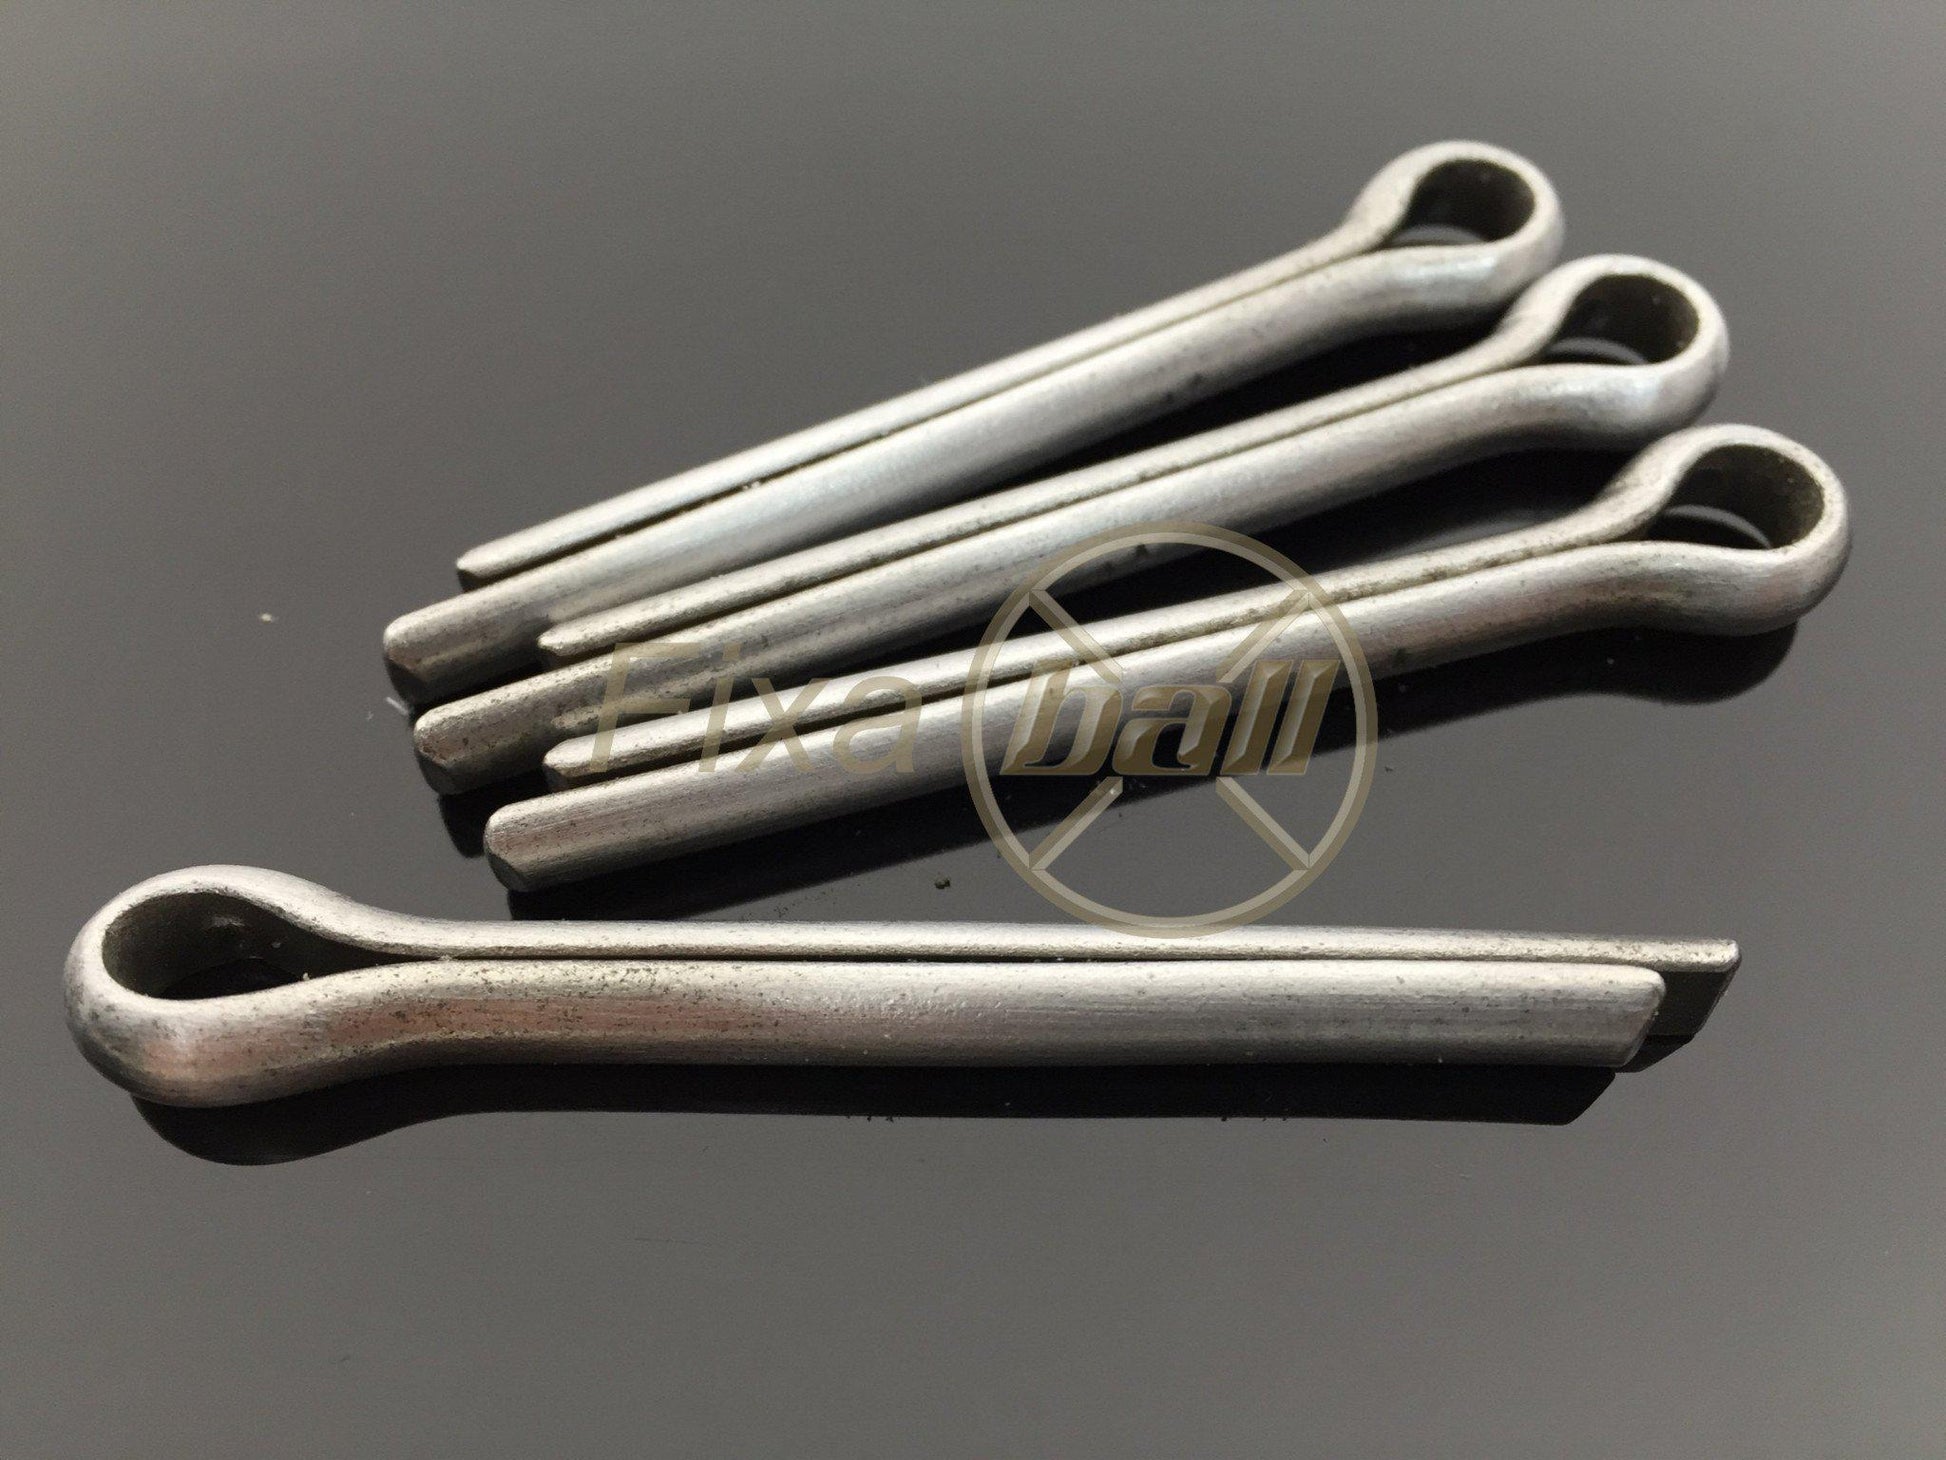 Split Cotter Pins, Split Pins, A2/ 304 Stainless Steel, DIN 94. Split Cotter Pins Split Cotter Pins, Split Pins, A2/ 304 Stainless Steel, DIN 94. Split Pins - A2 Stainless Steel